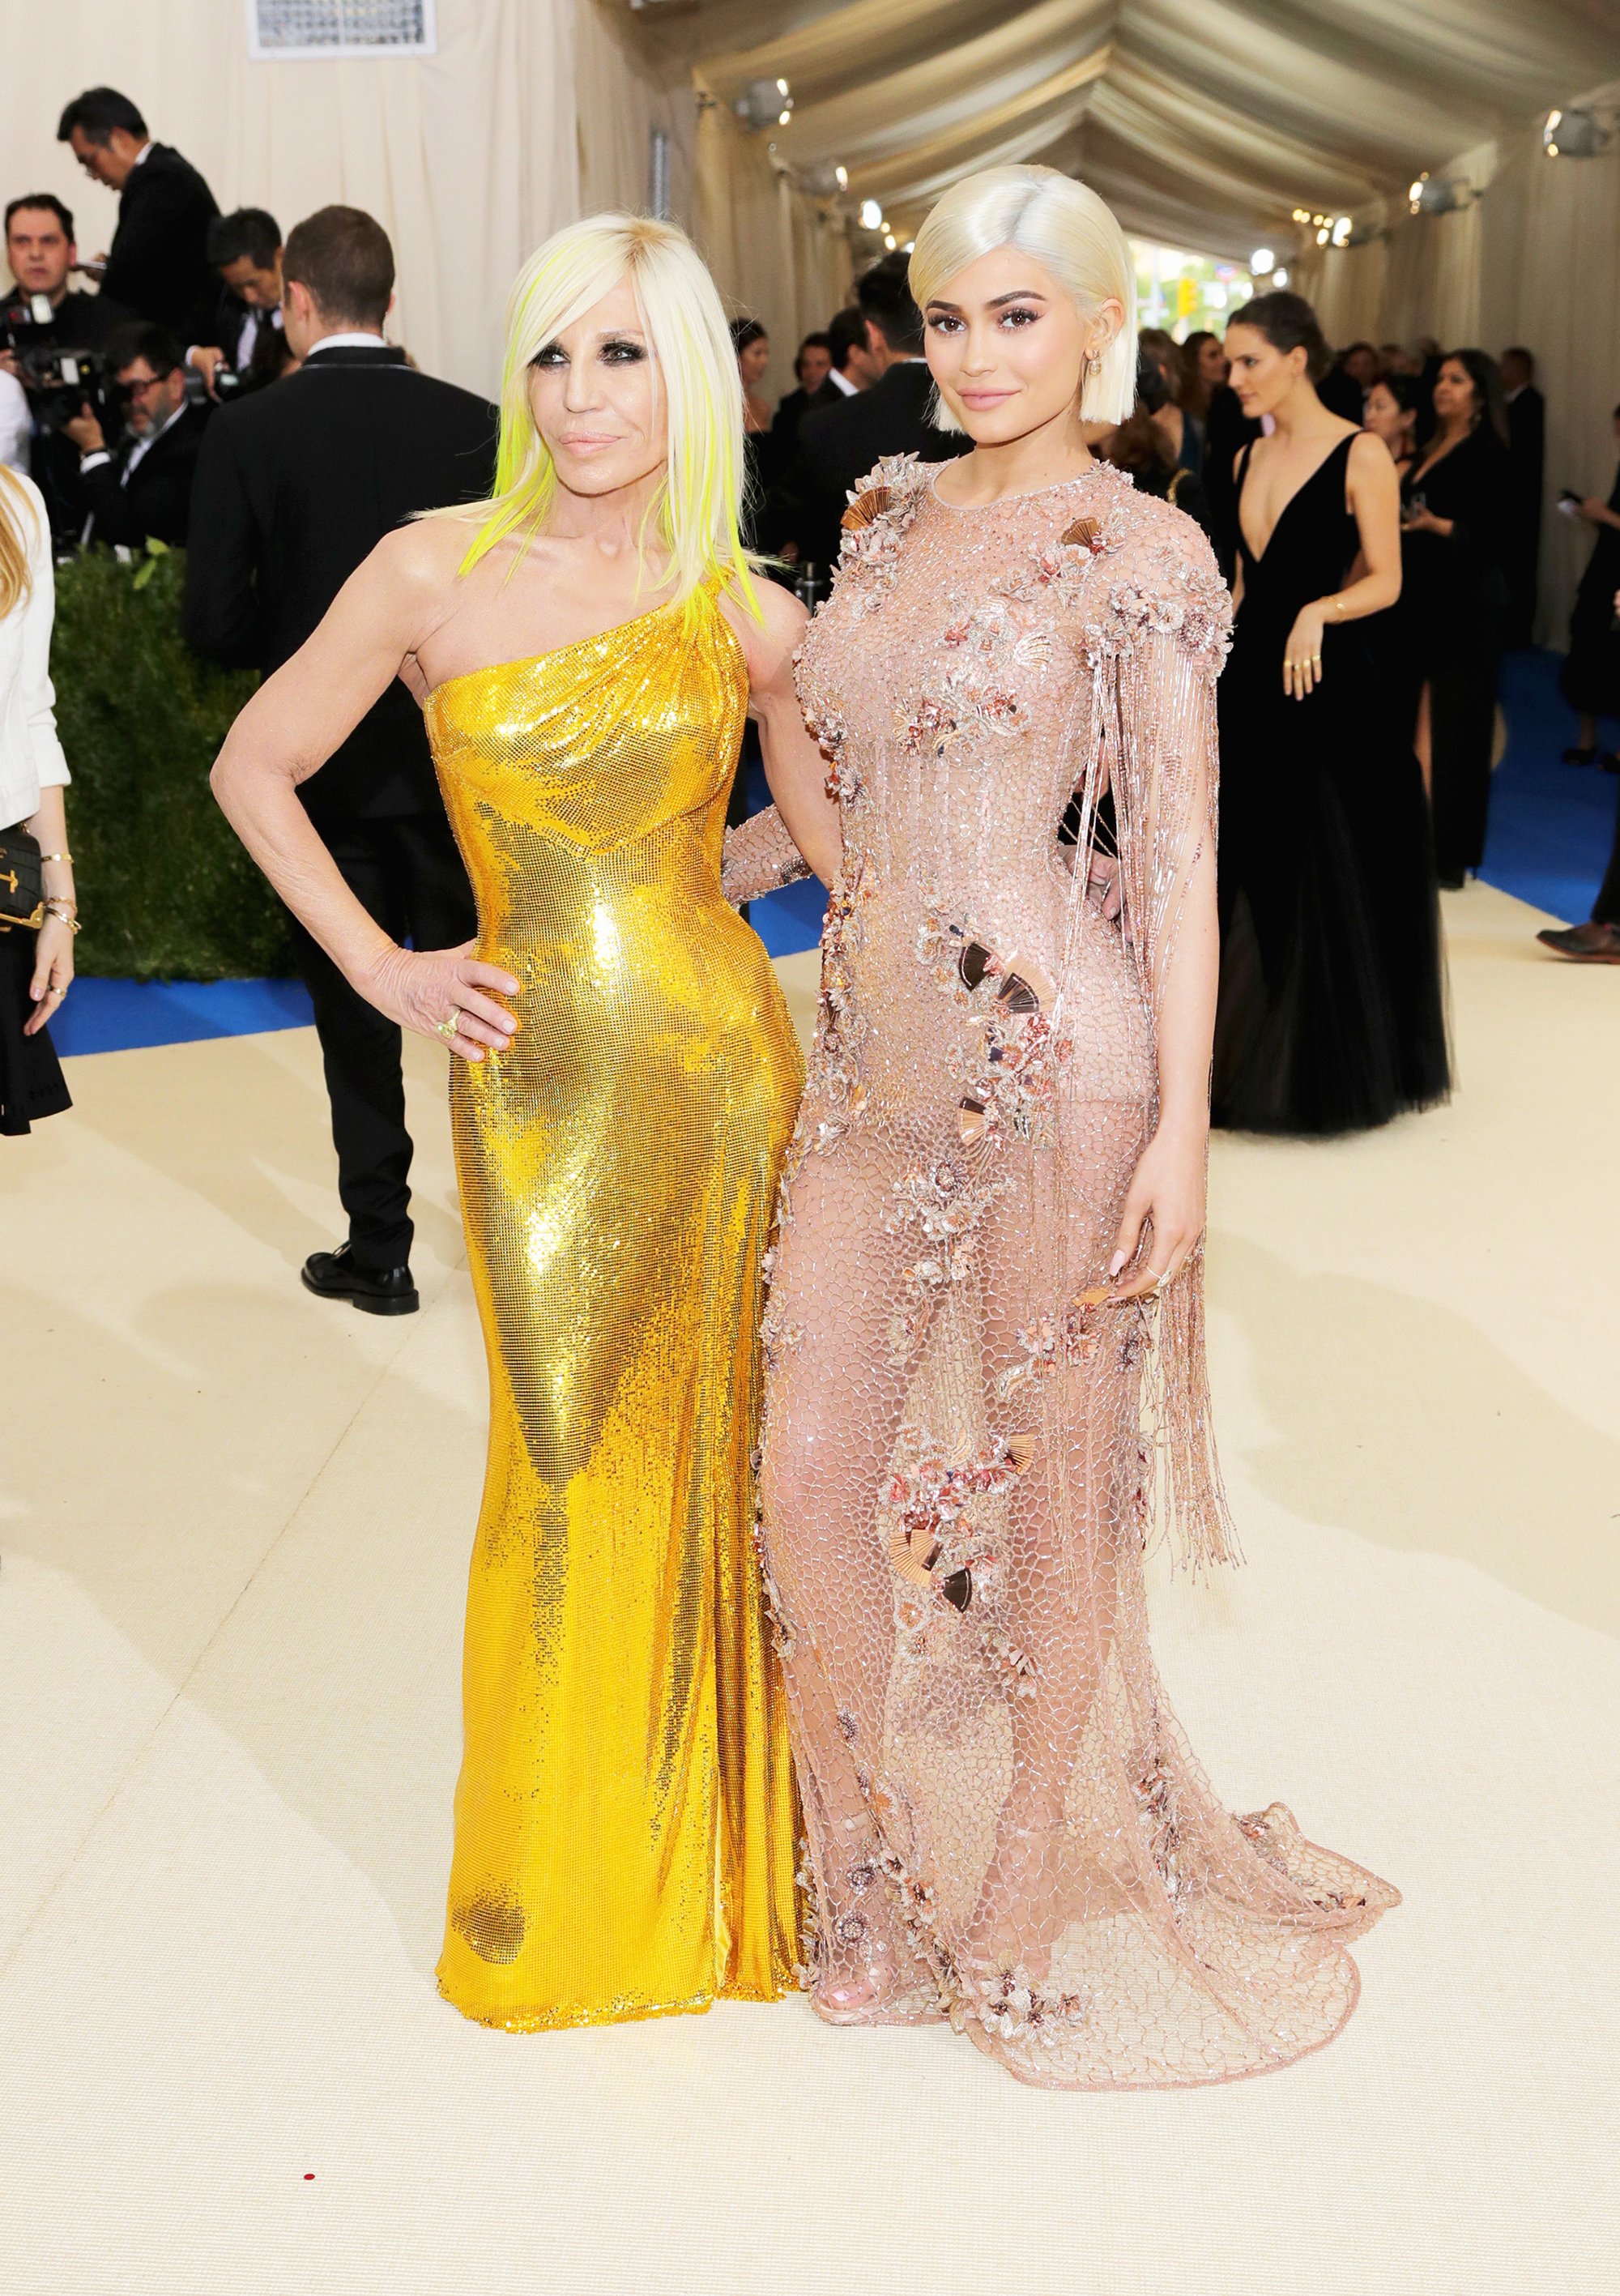 Donatella Versace and Kylie Jenner attend The Metropolitan Museum of Art's Costume Institute benefit gala celebrating the opening of the Rei Kawakubo/Comme des Garçons: Art of the In-Between exhibition in New York City, on May 1, 2017.